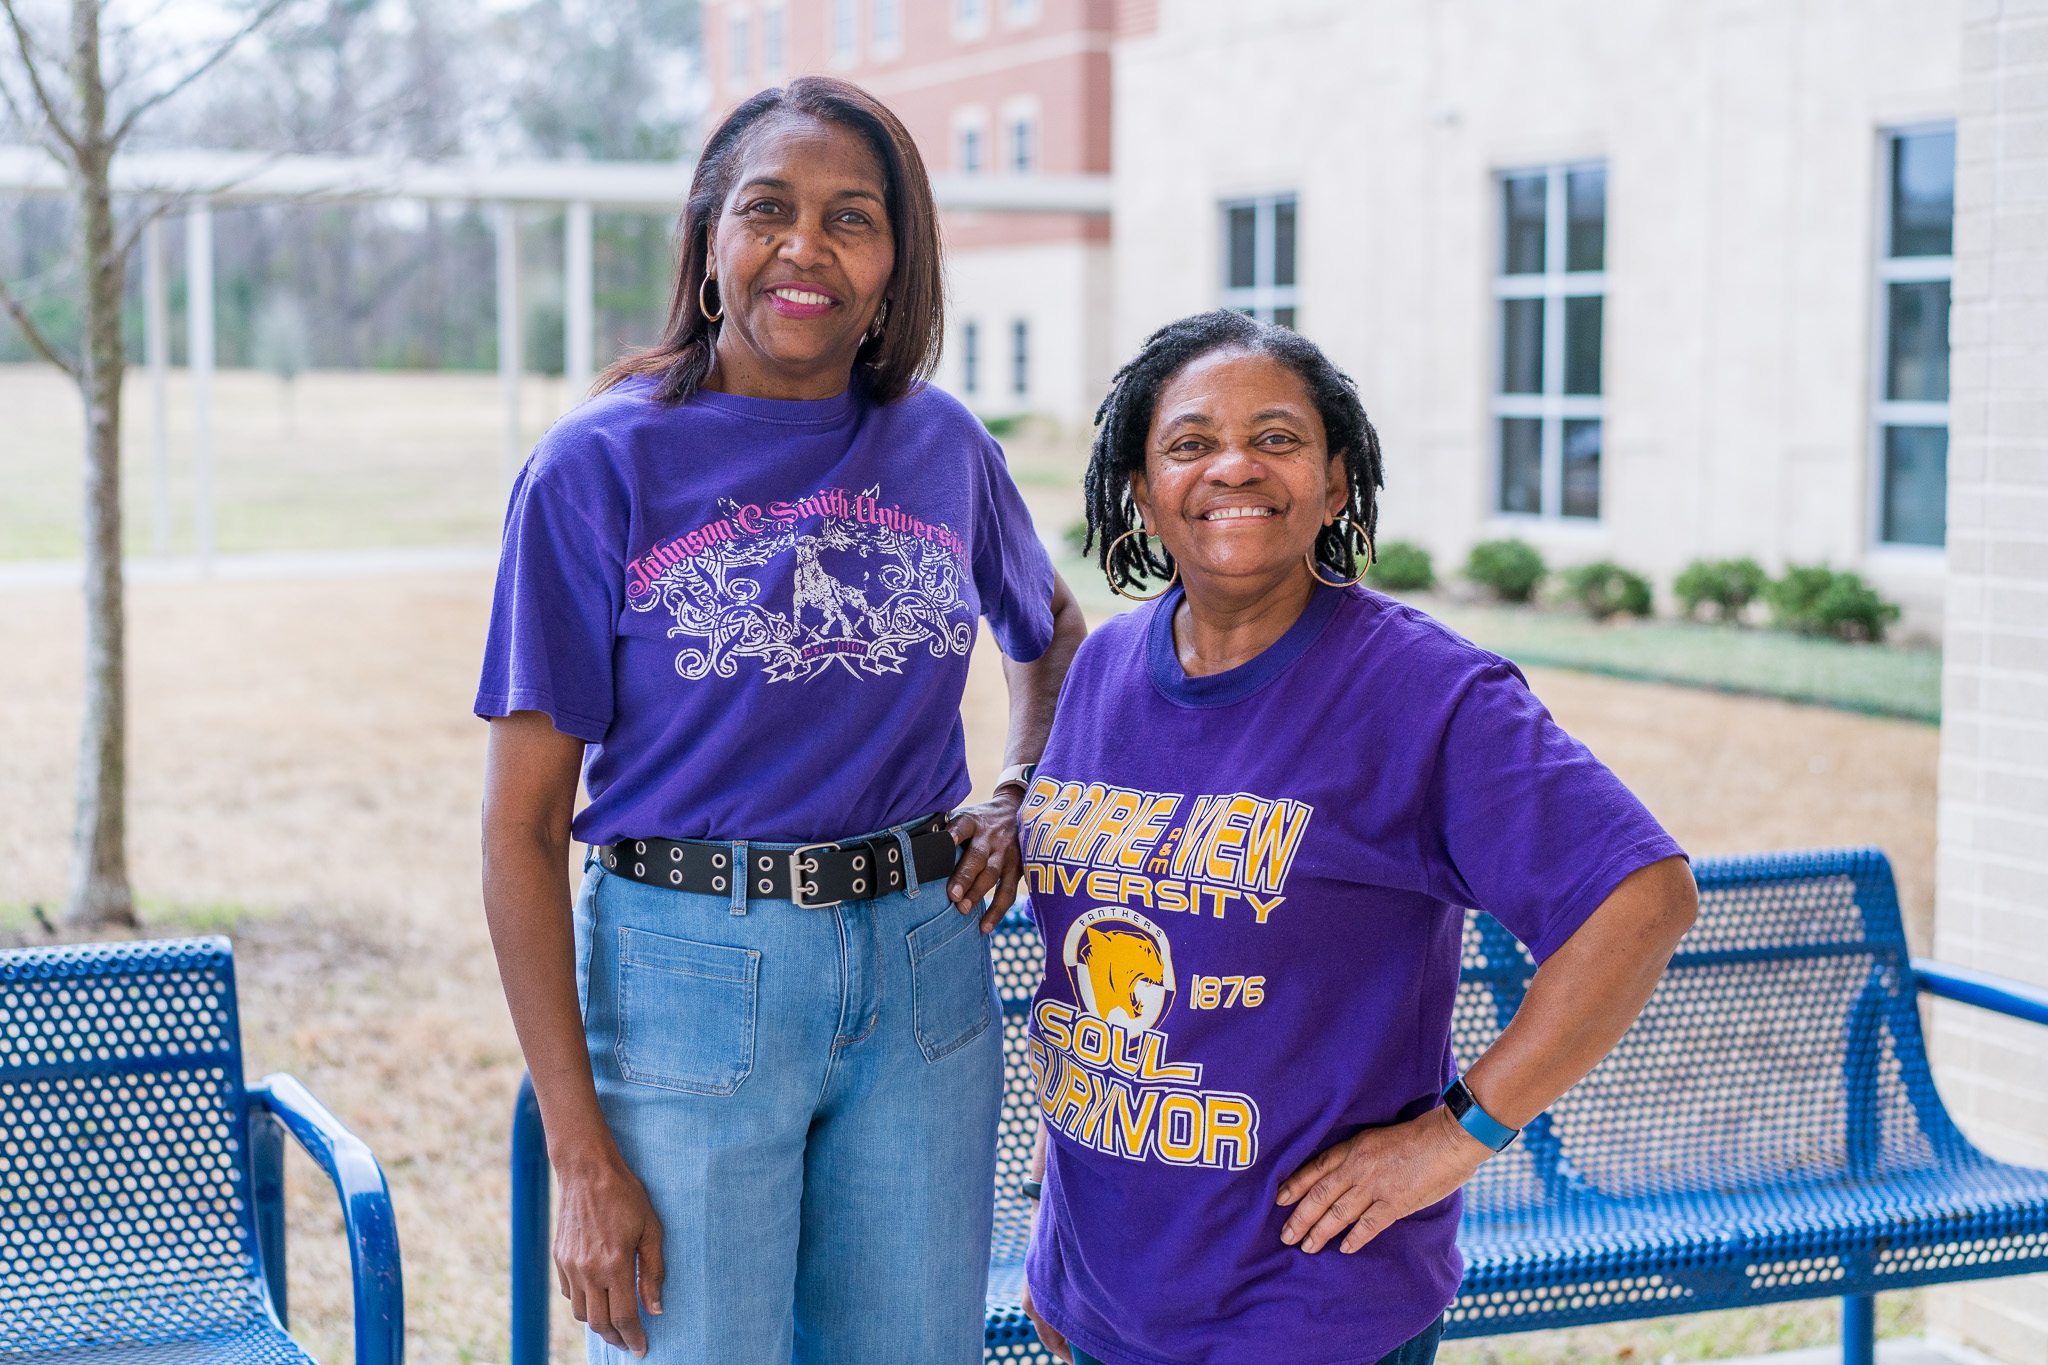 two women stand next to each other wearing purple college shirts